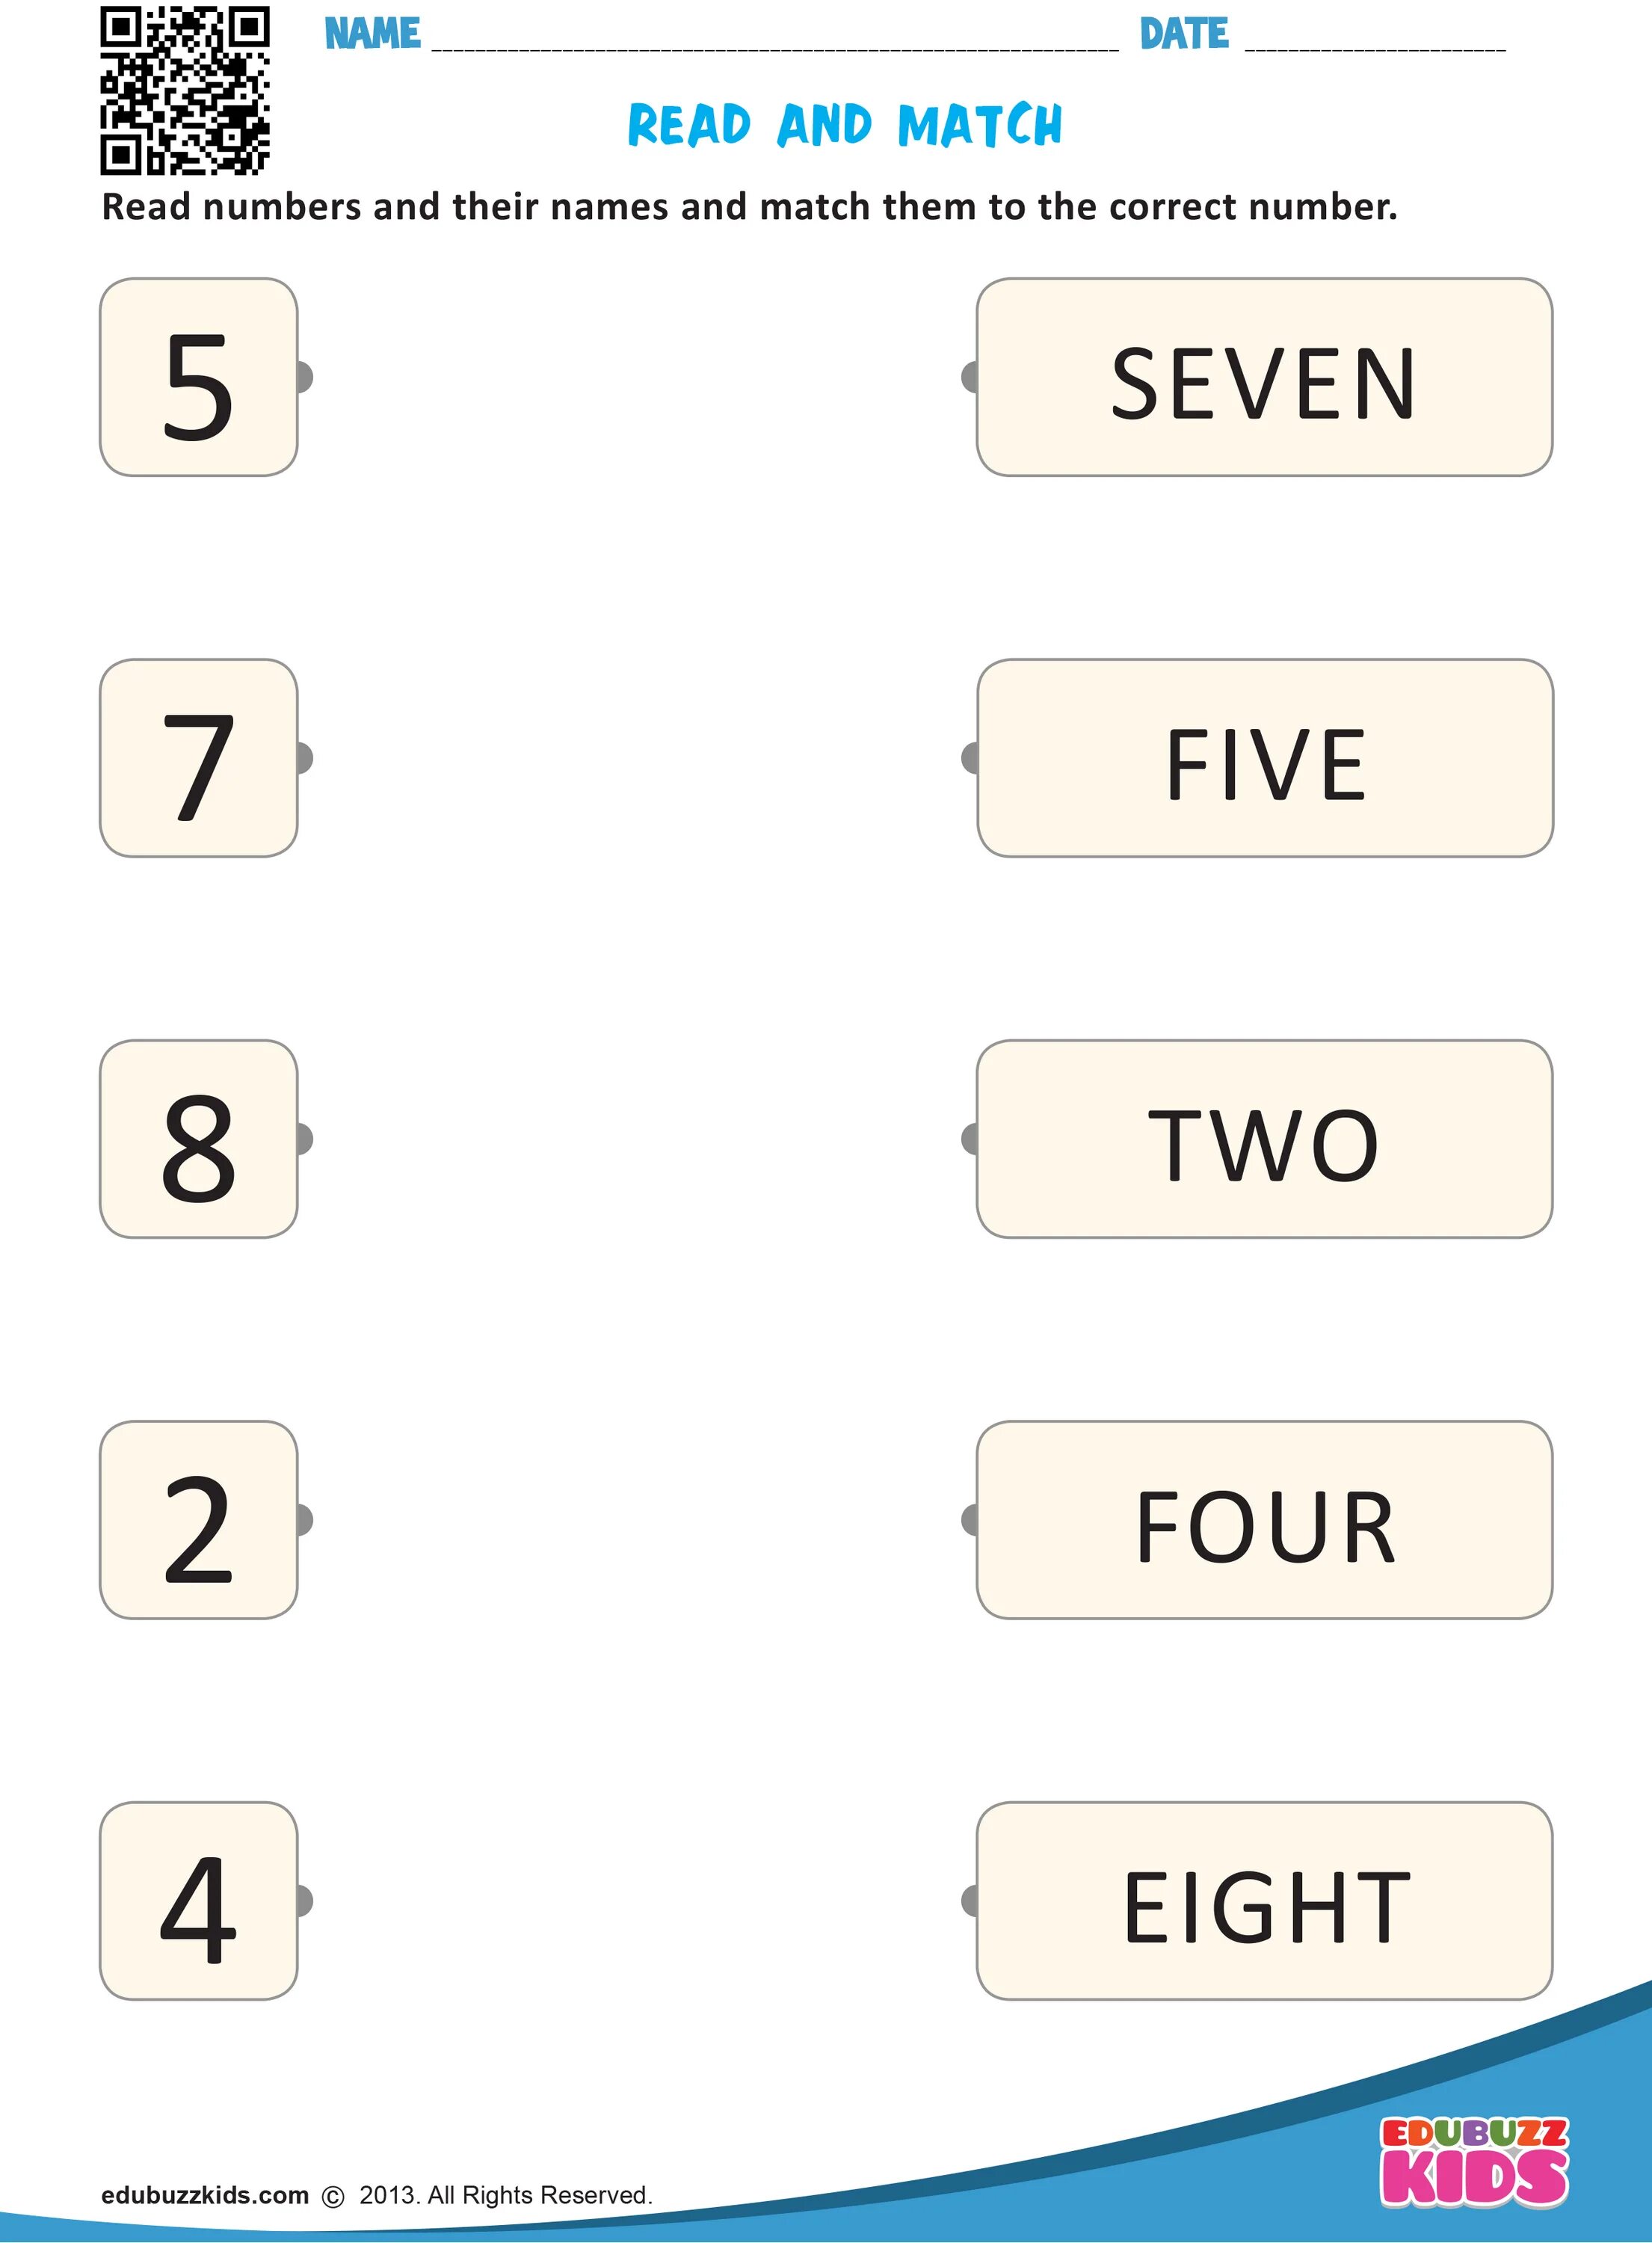 Number Match. Match the numbers names. Read and number. Numbers in Words Match.